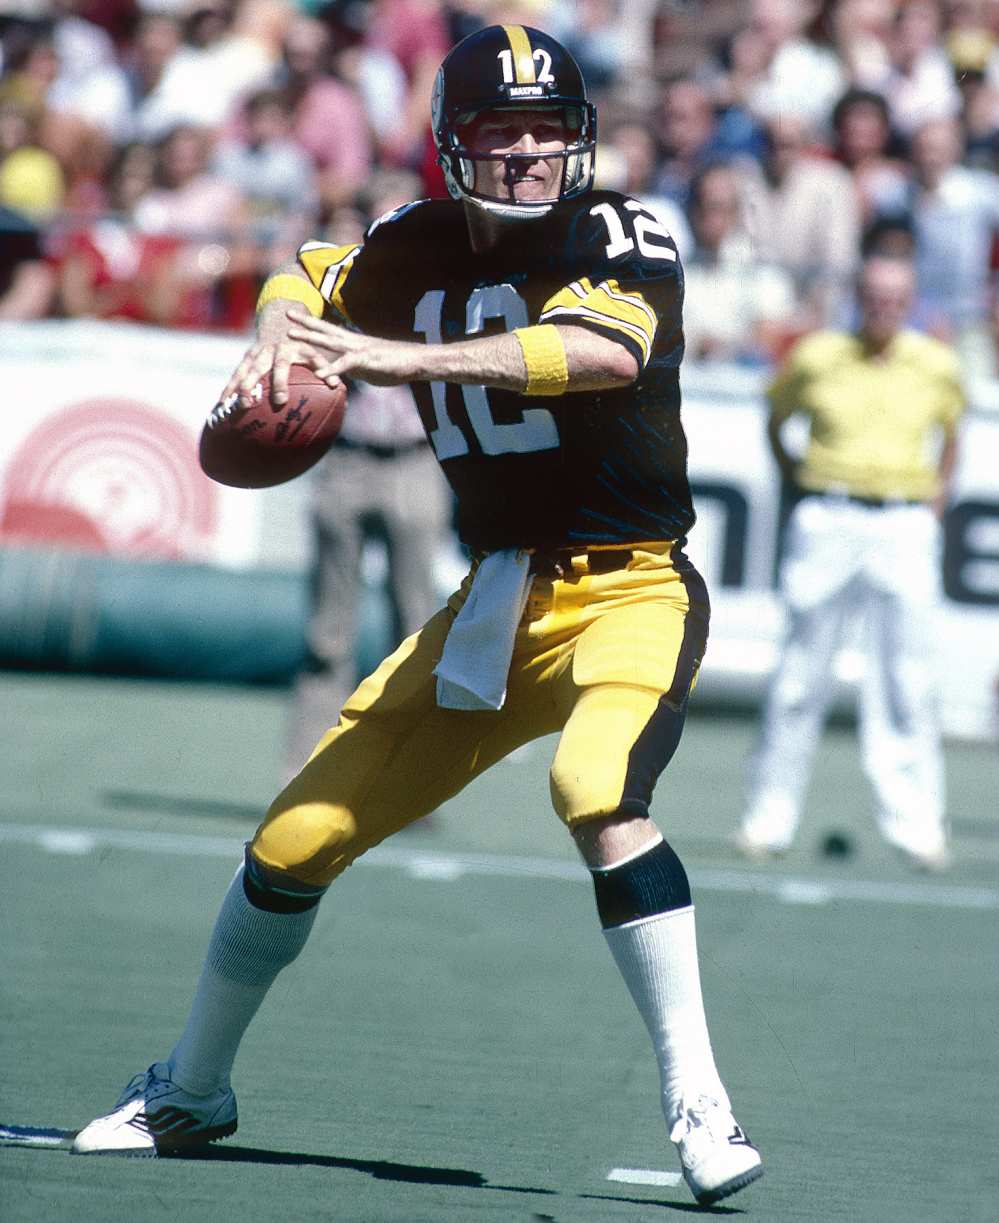 Terry Bradshaw #12 of the Pittsburgh Steelers circa 1970's